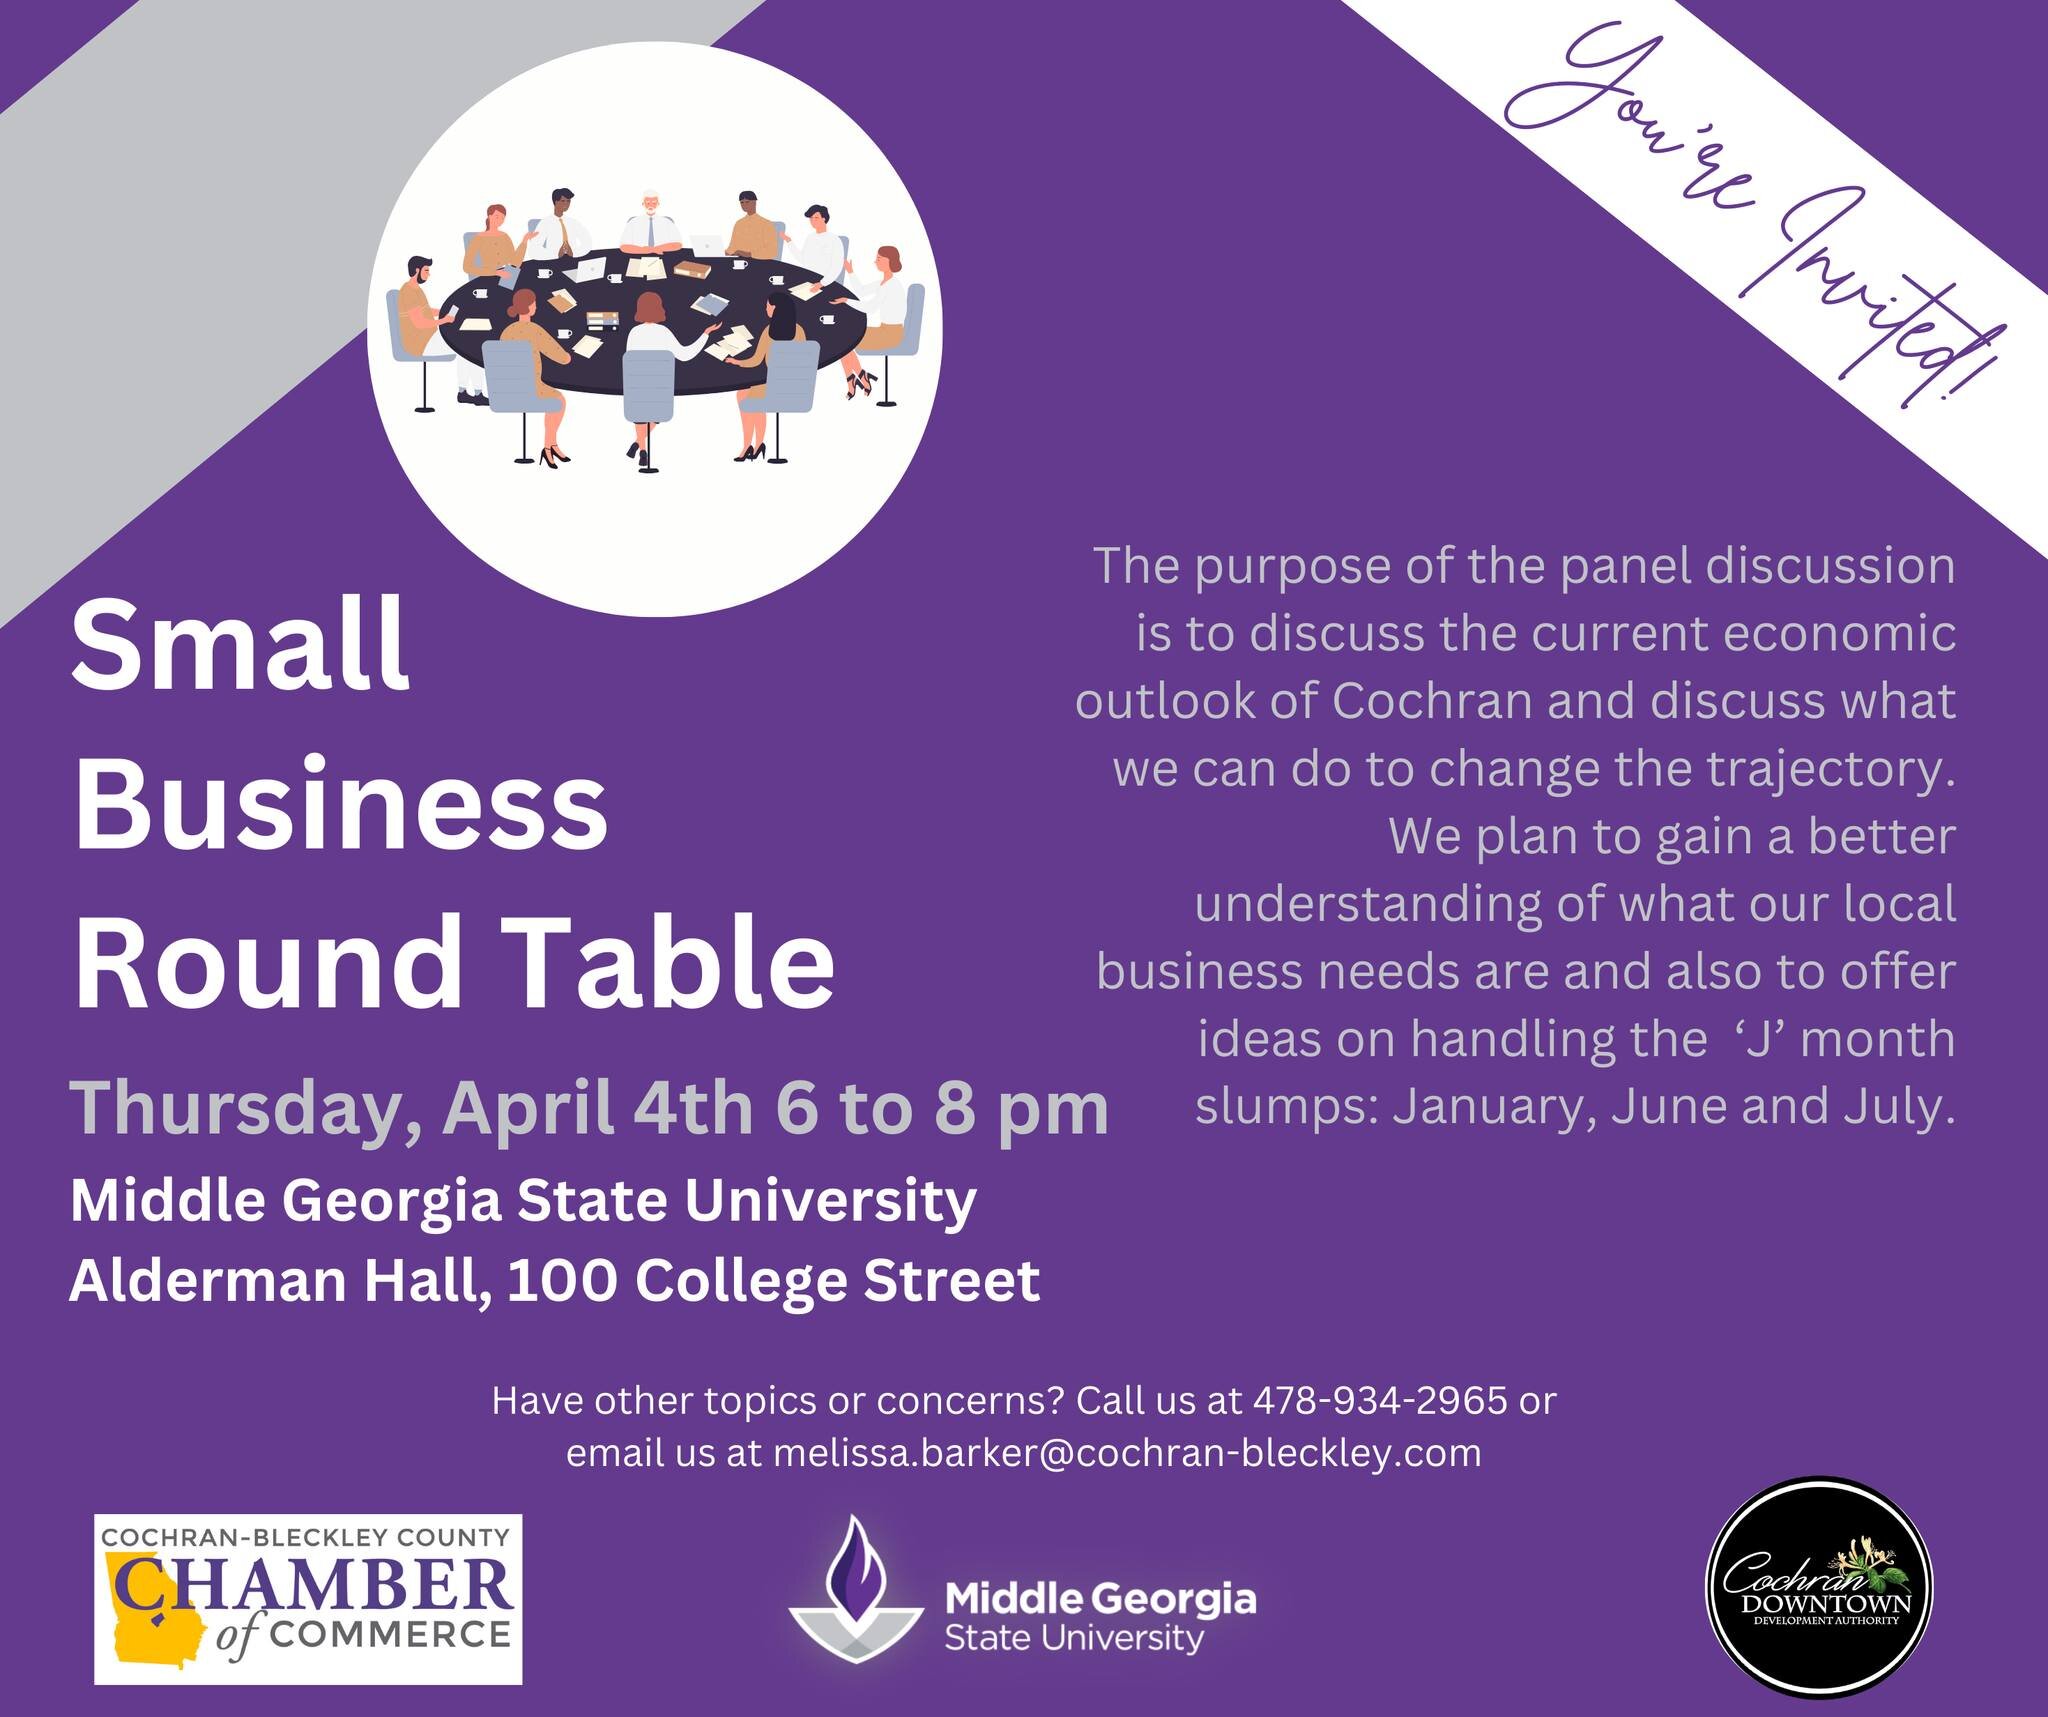 You're Invited!
Come join us as we discuss the current economic state of our area and talk about ways local businesses can change the trajectory of their businesses especially in the upcoming June and July months.
Have other topics or concerns? Call 